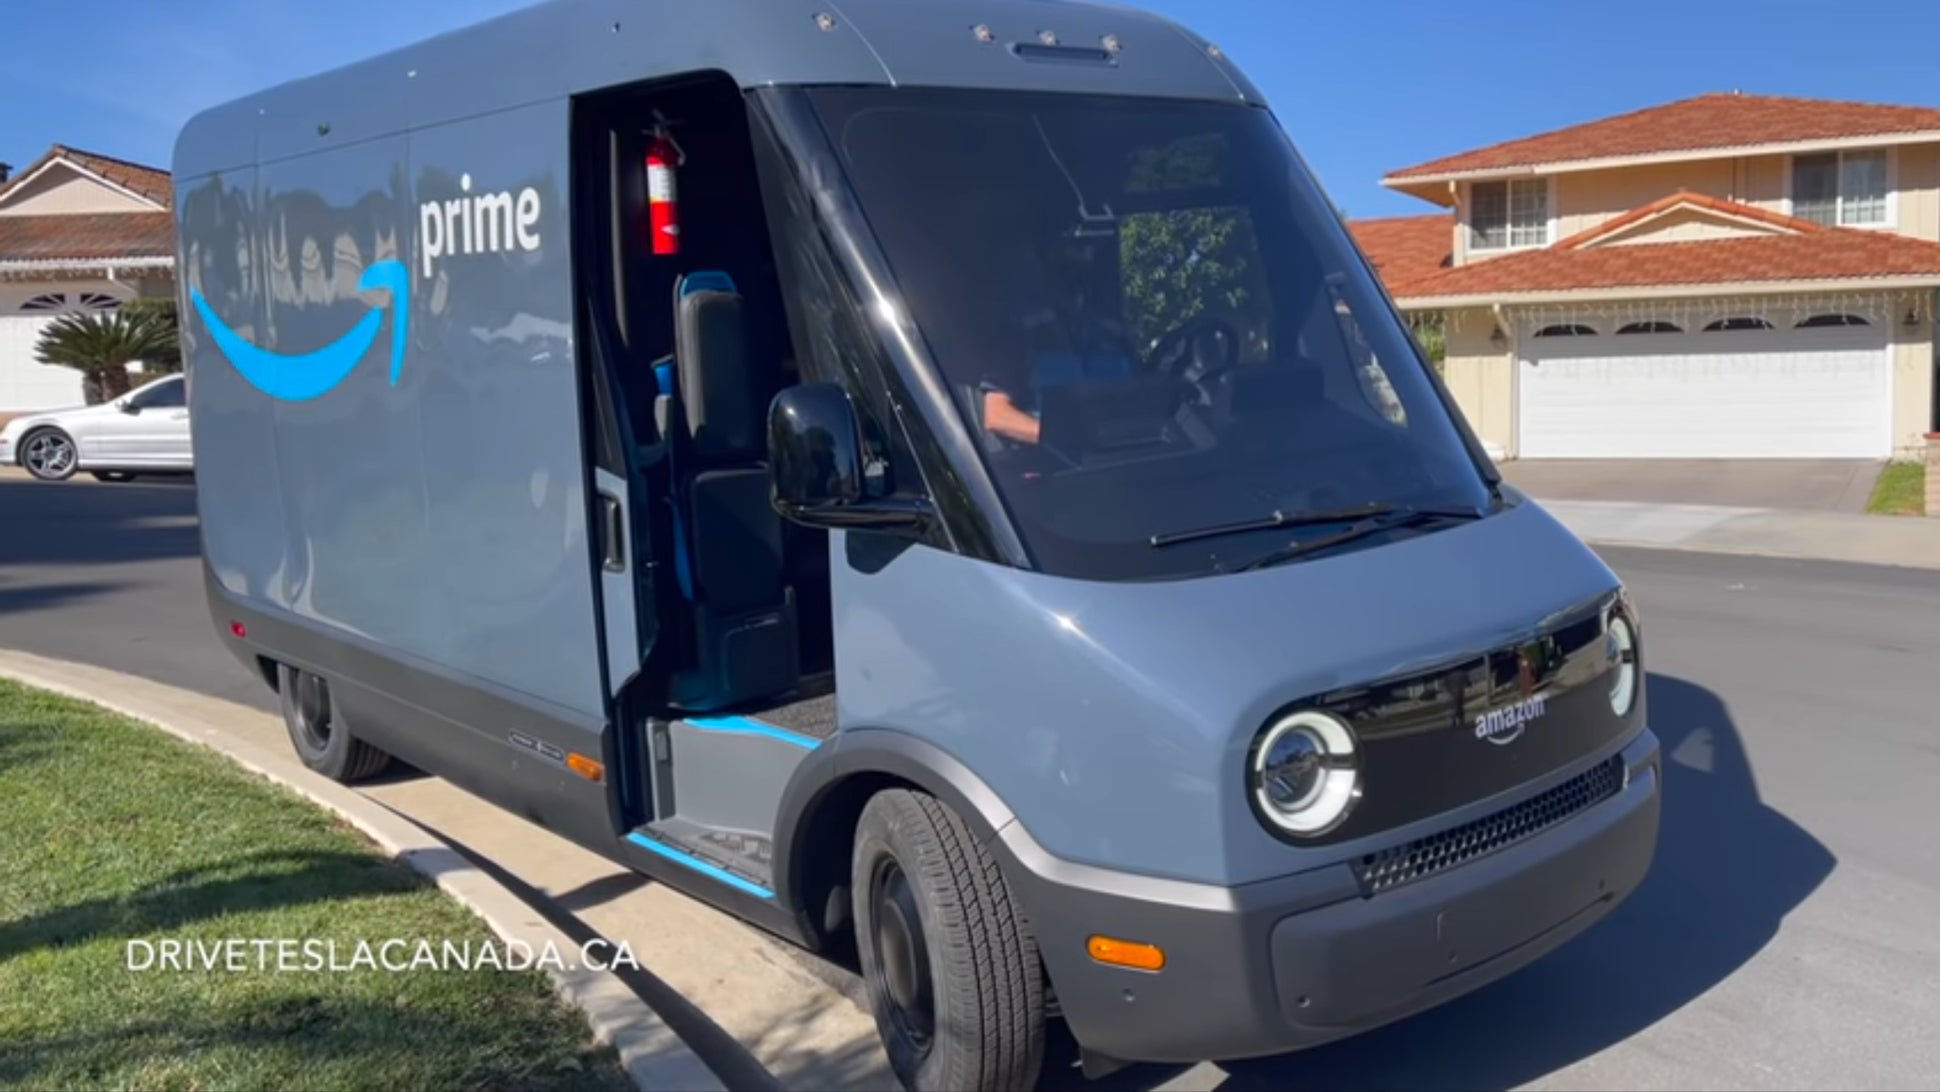 Listen to the Loud, Irritating Noise Made by Amazon’s Electric Rivian Delivery Vans